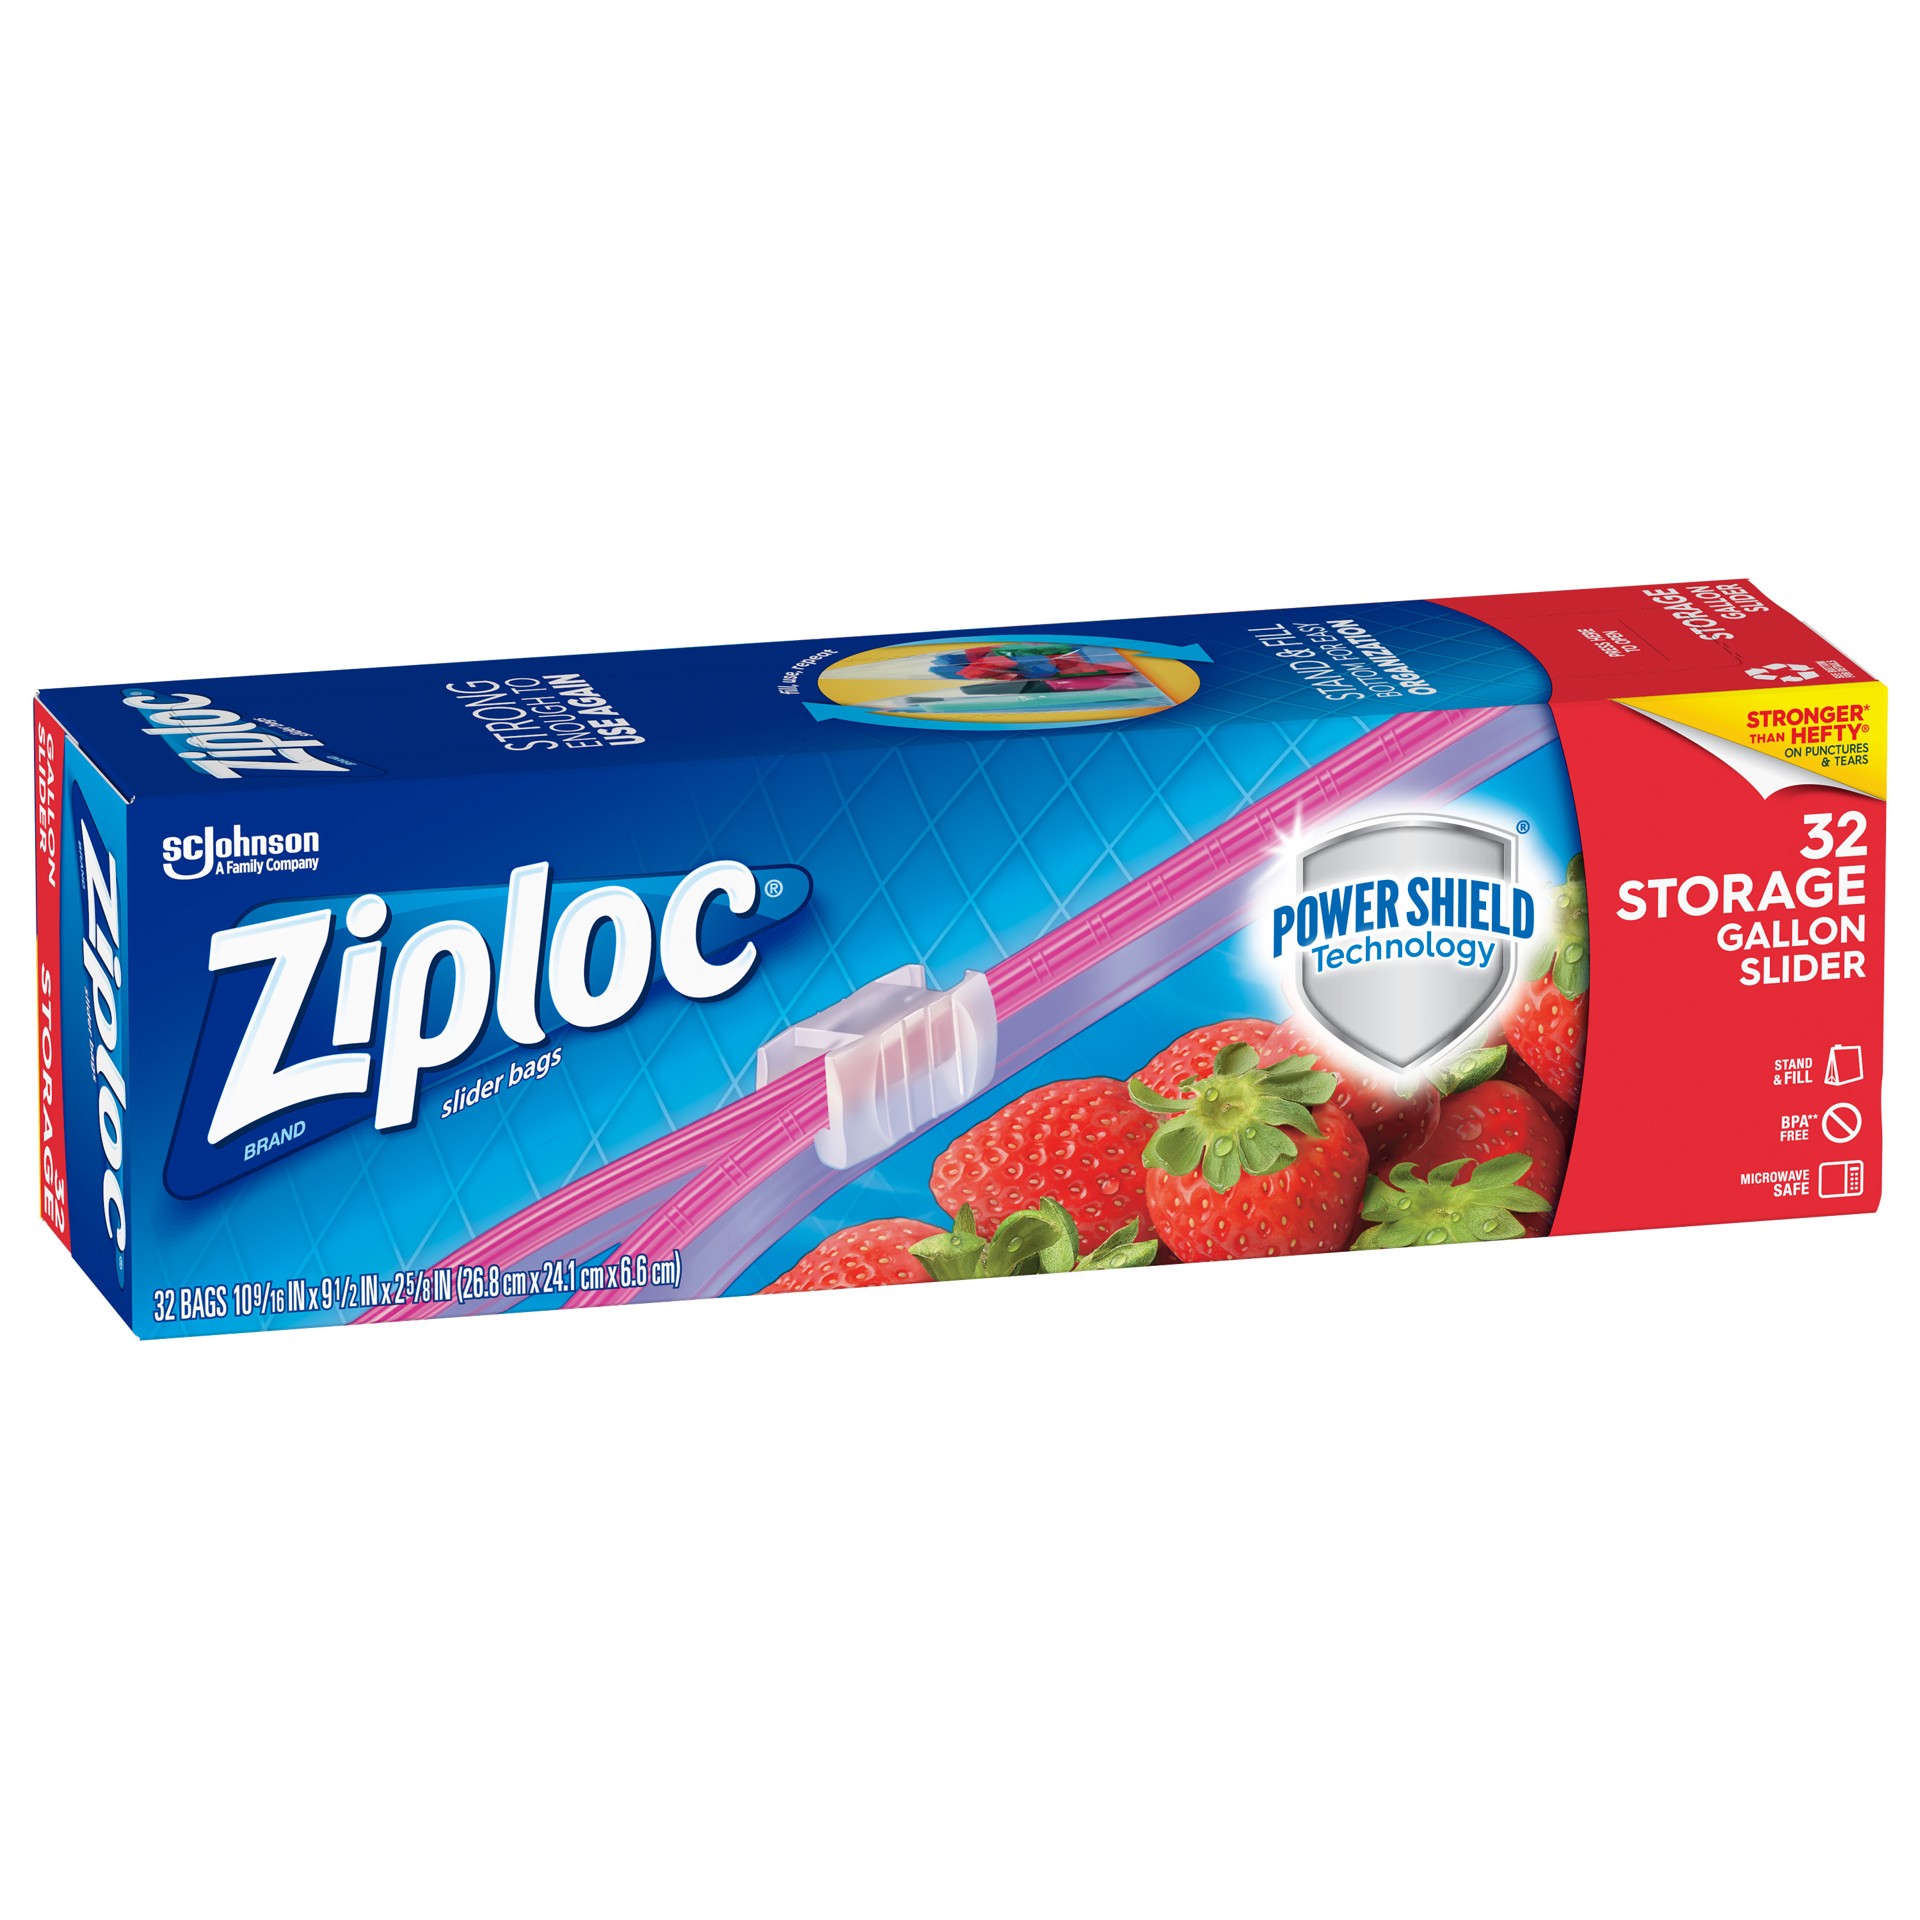 slide 3 of 4, Ziploc Slider Storage Gallon Bags with Power Shield Technology, 32 Count, 32 ct